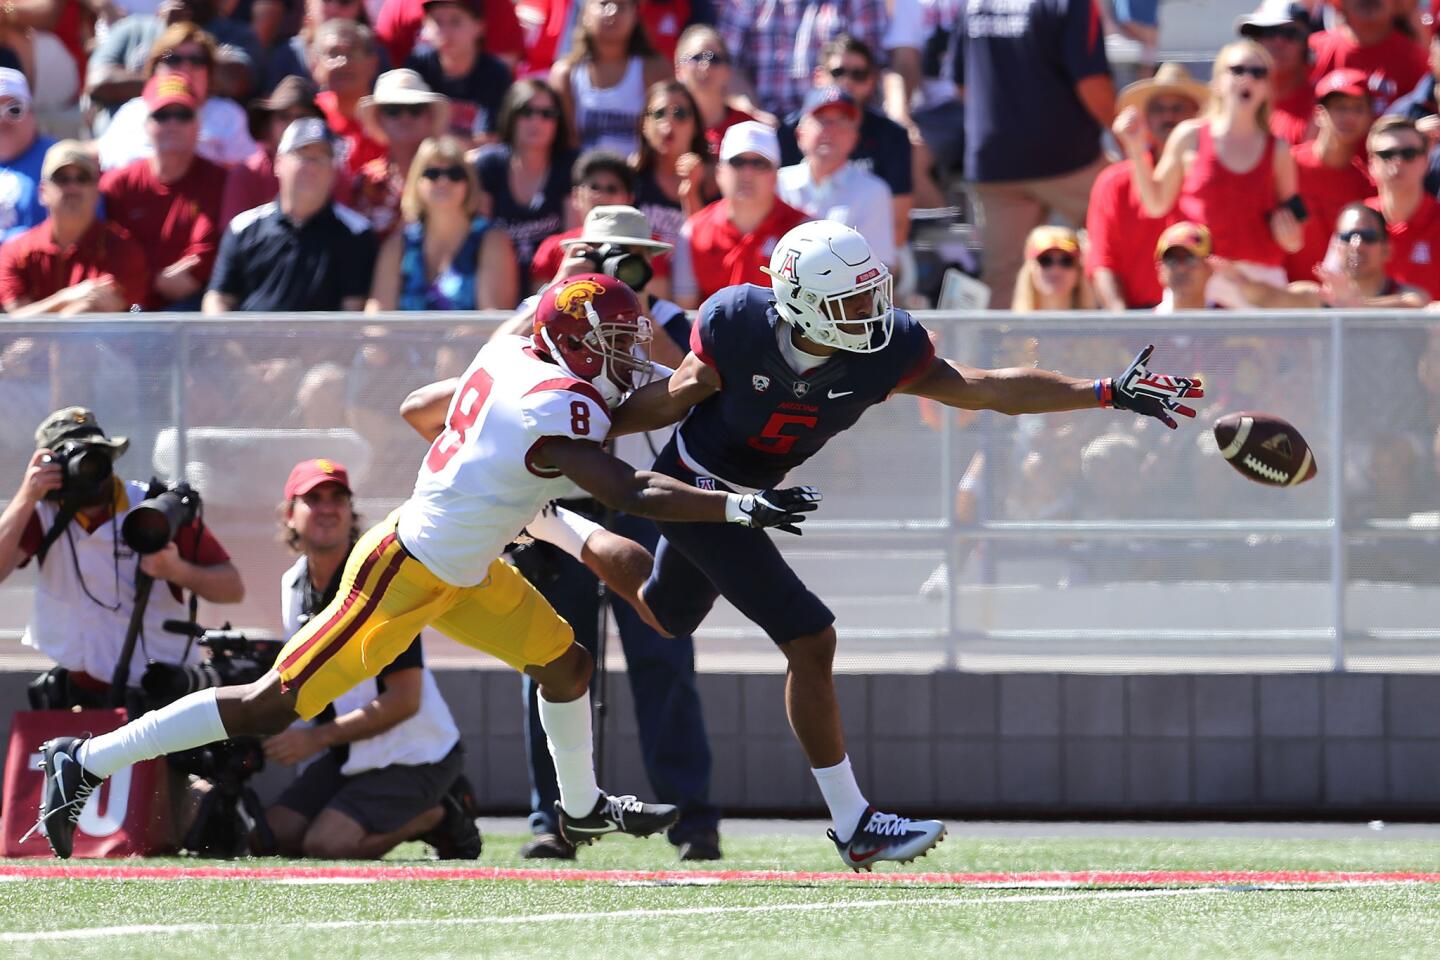 Arizona receiver Trey Griffey can't haul in a pass while being defended by USC defensive back Iman M